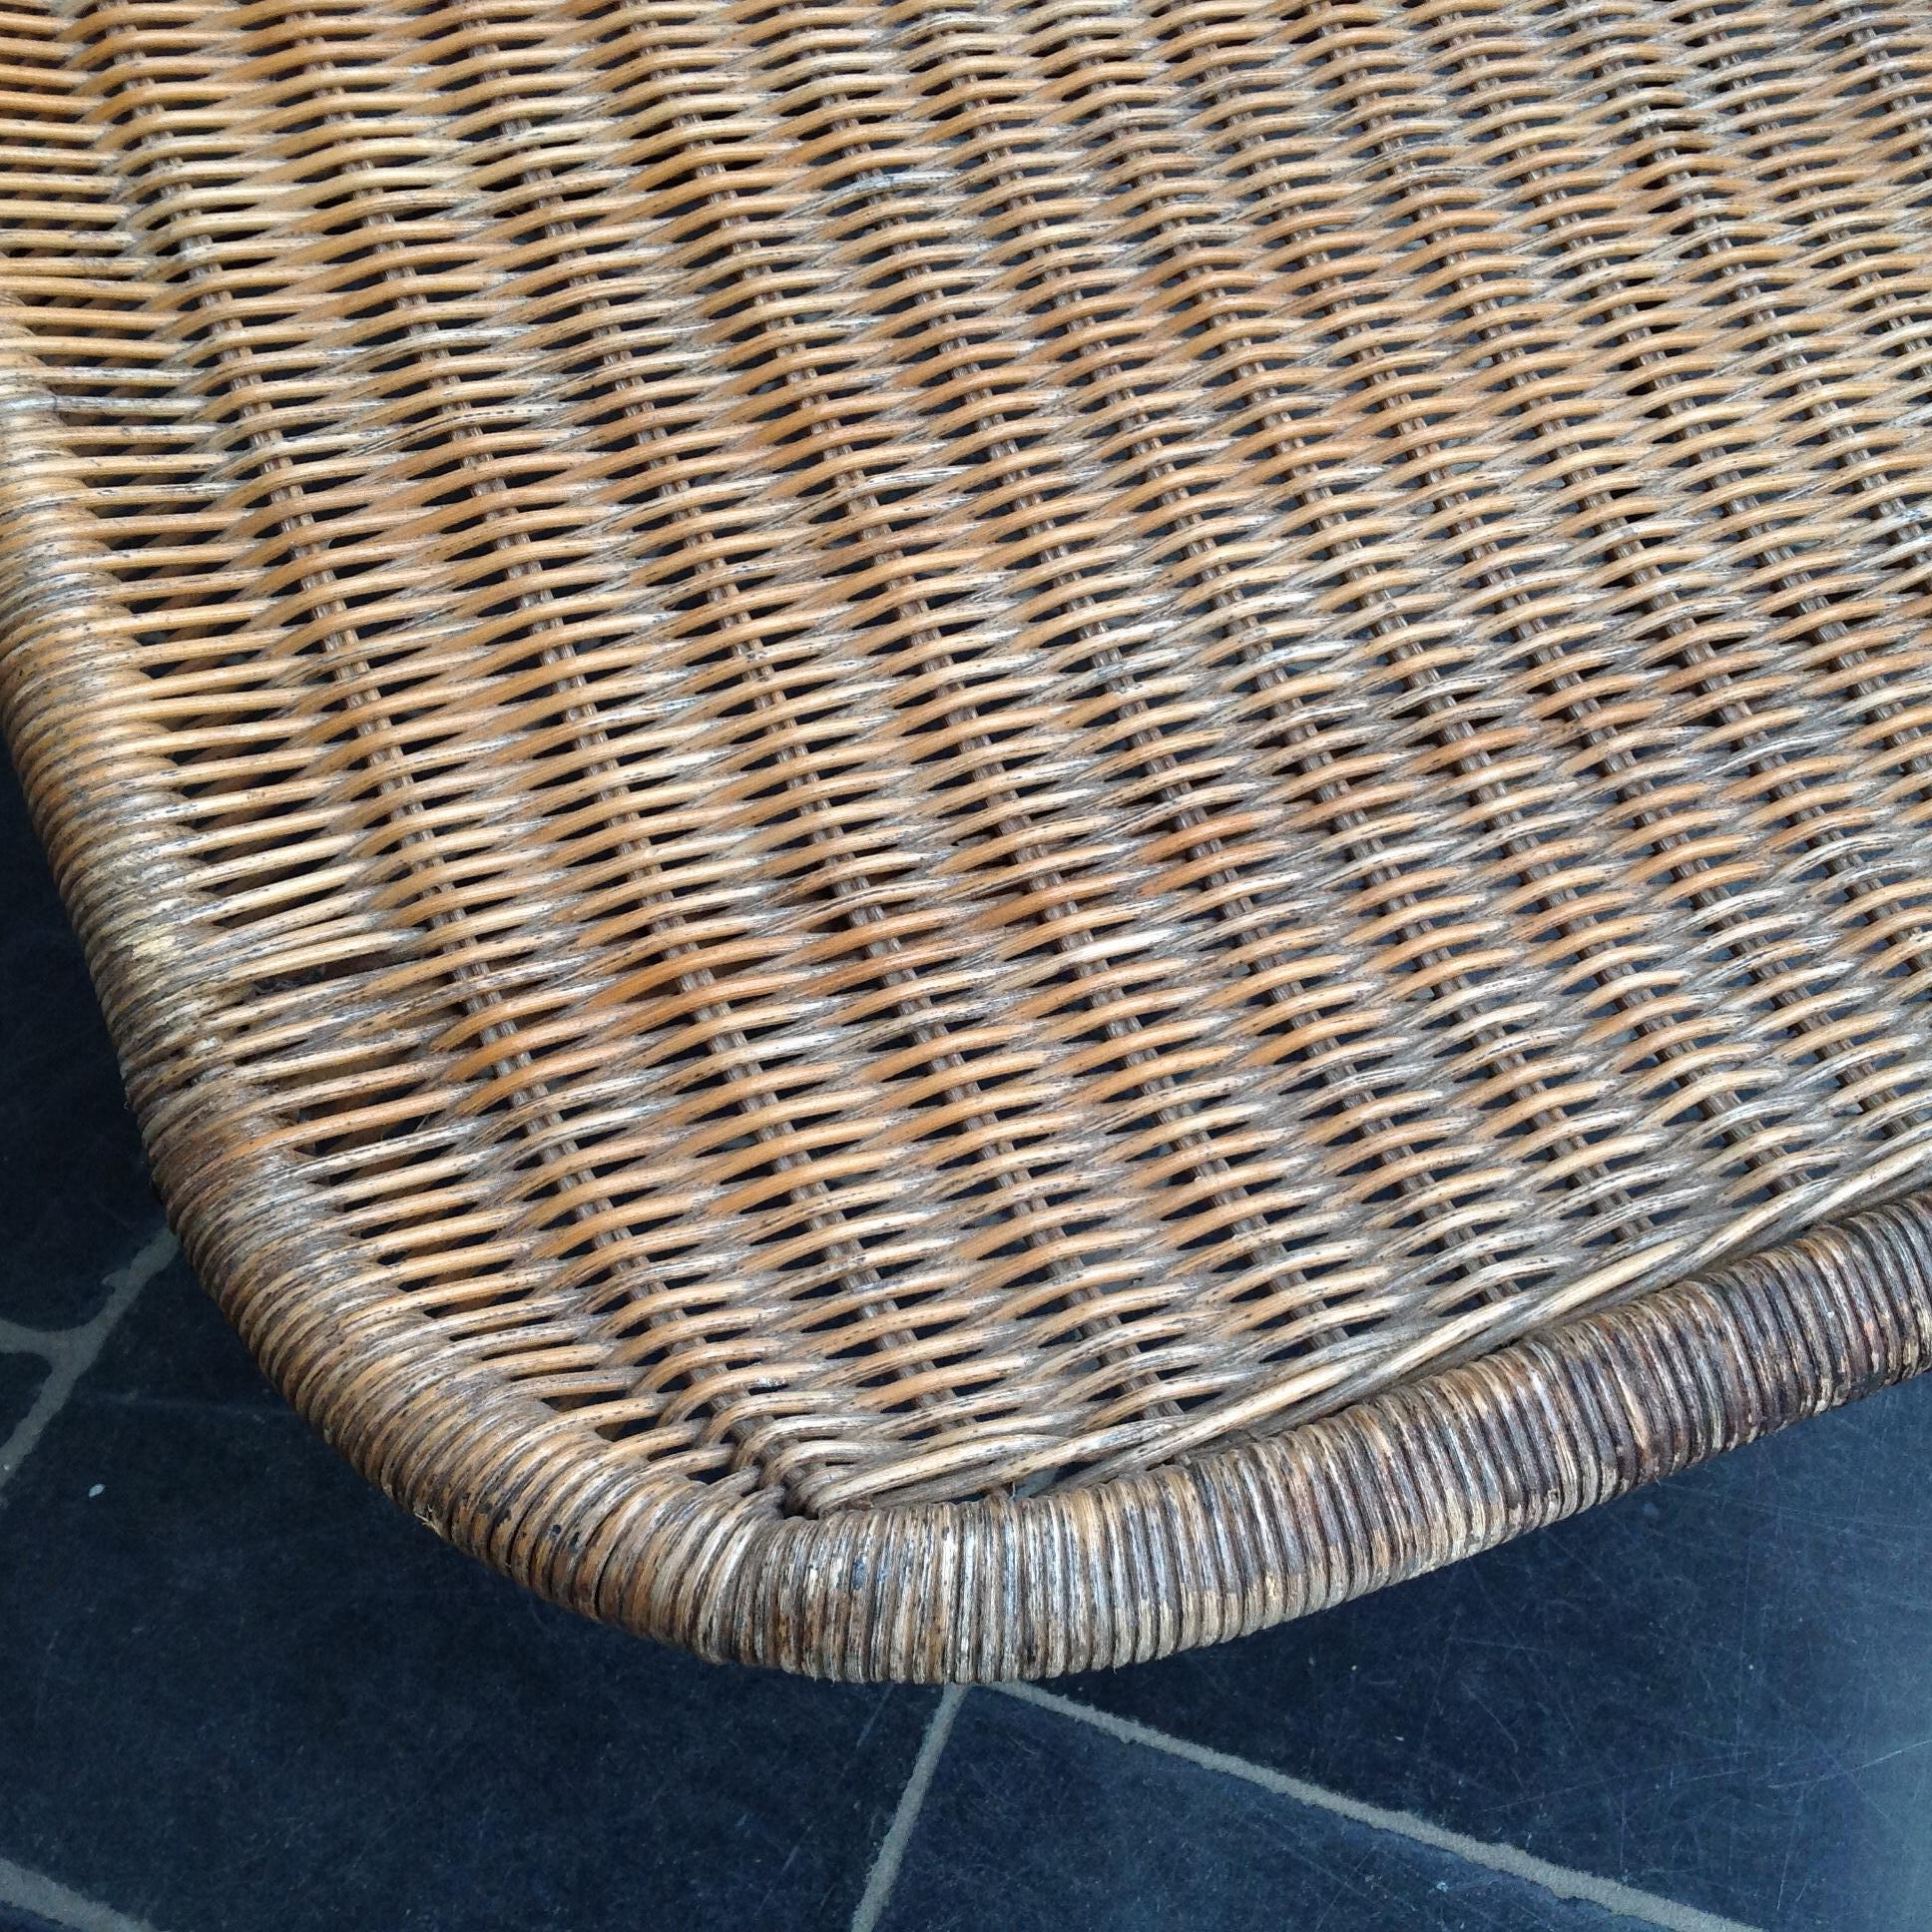 Chaise Longue in Cane, Wicker, Design by Dirk Van Sliedrecht for Rohé, 1960s For Sale 2